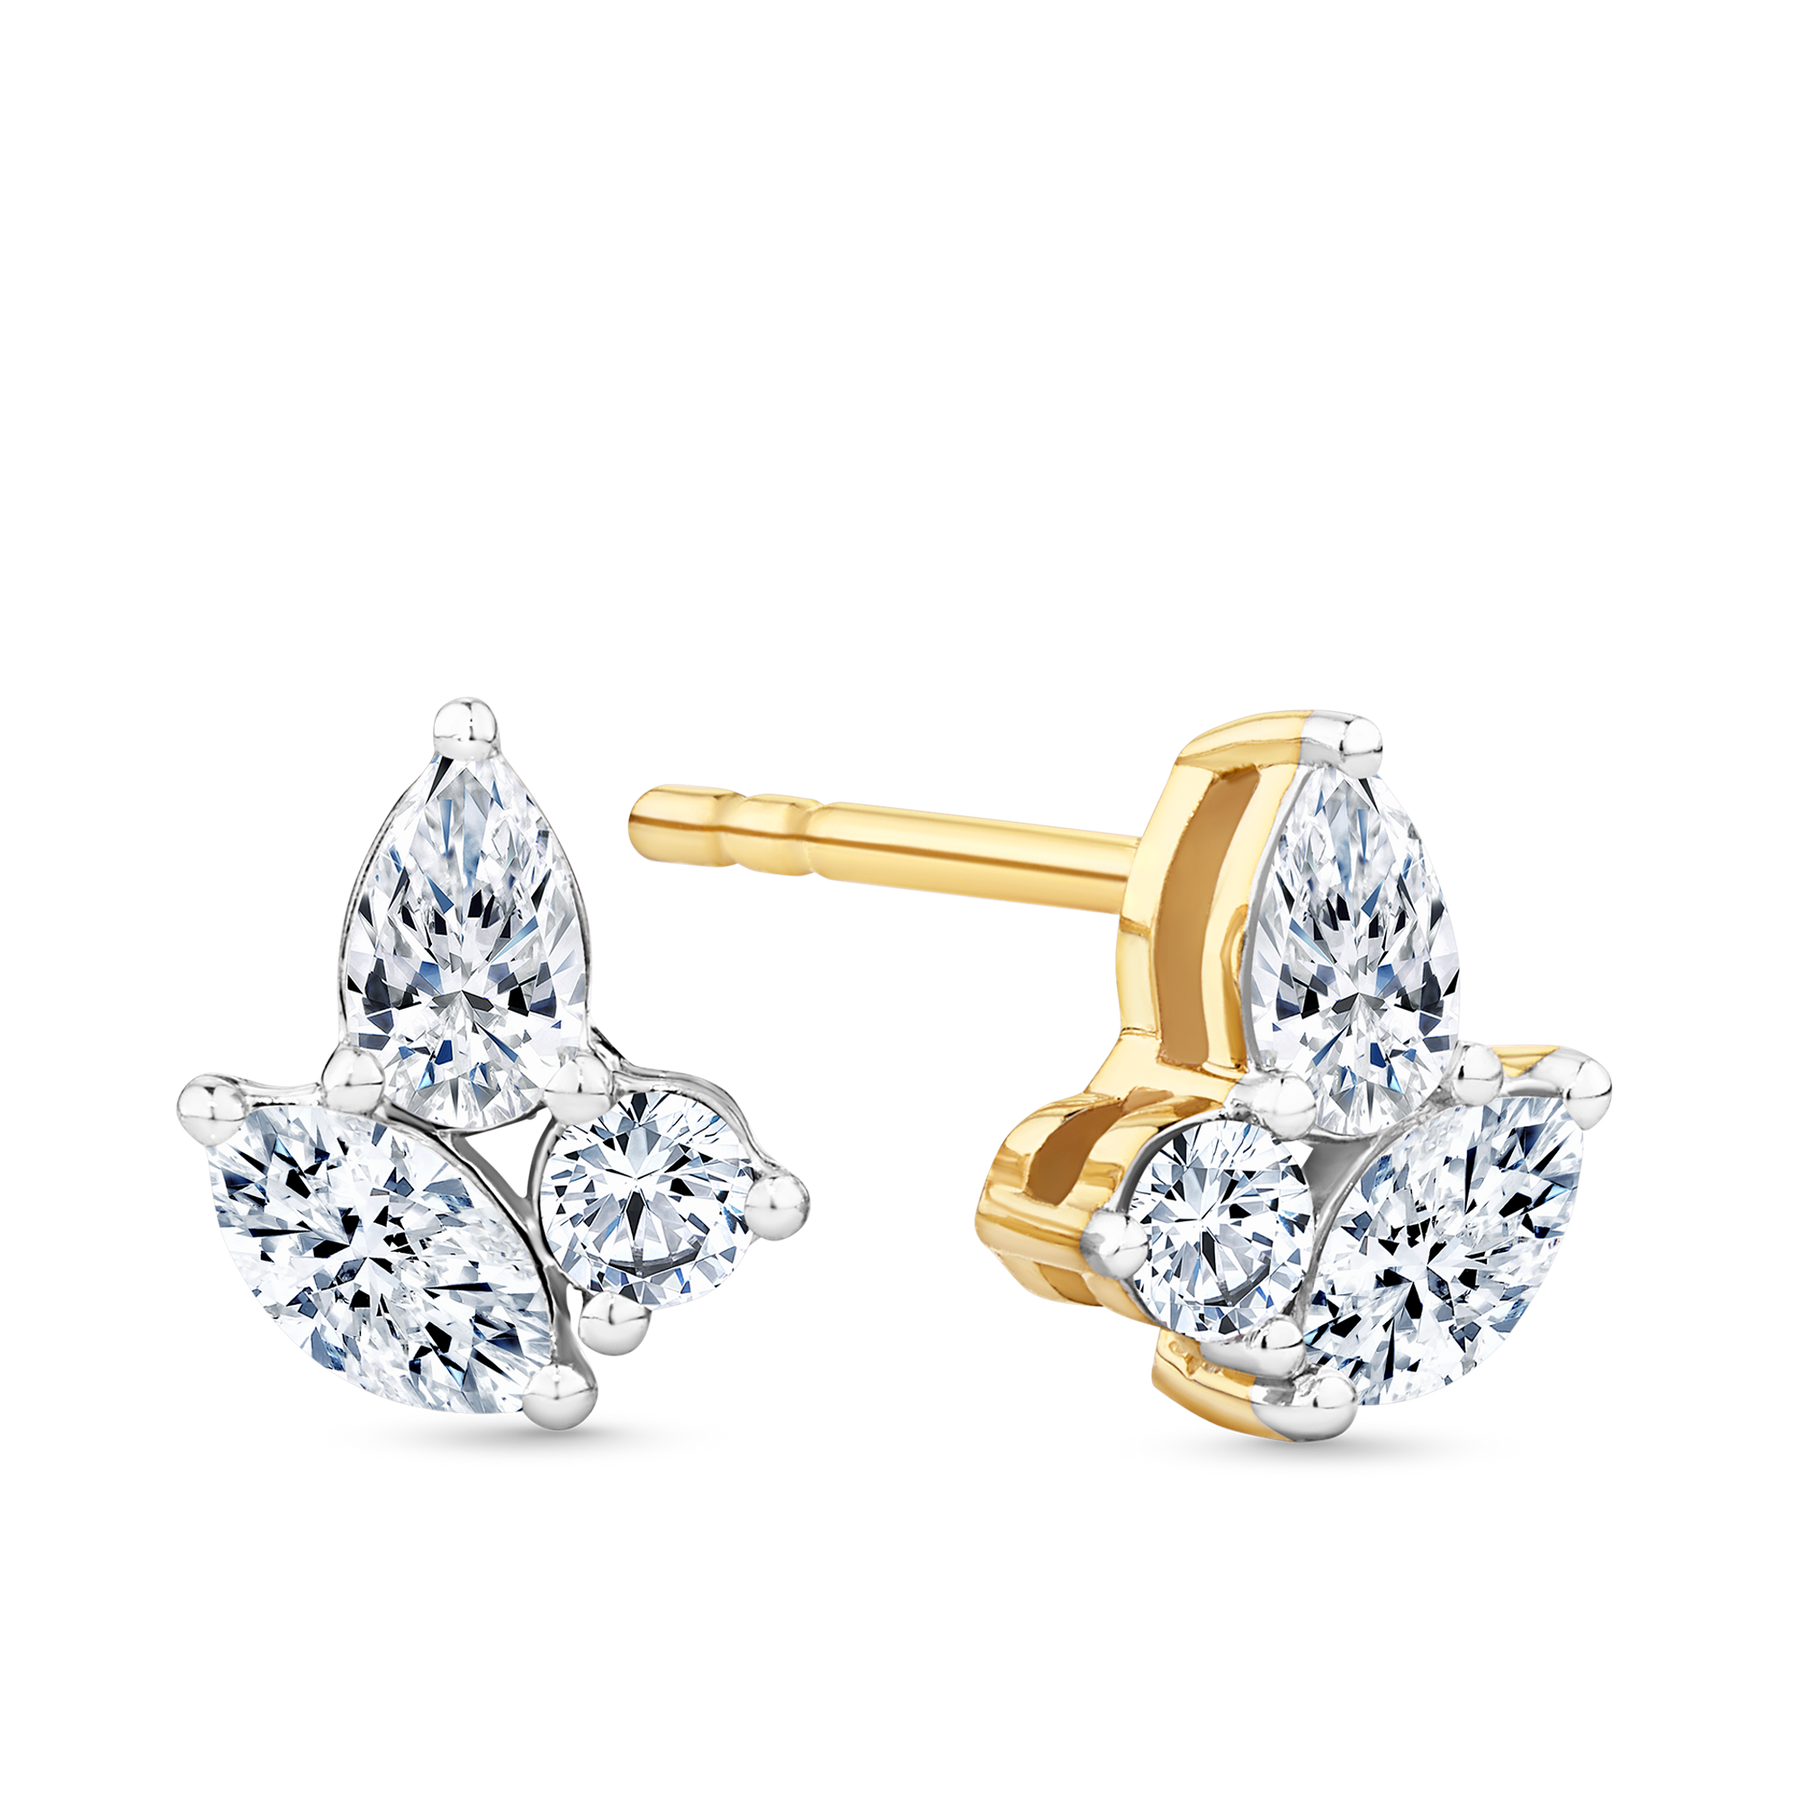 0.40ct TW Diamond Cluster Earrings in 9ct Yellow Gold